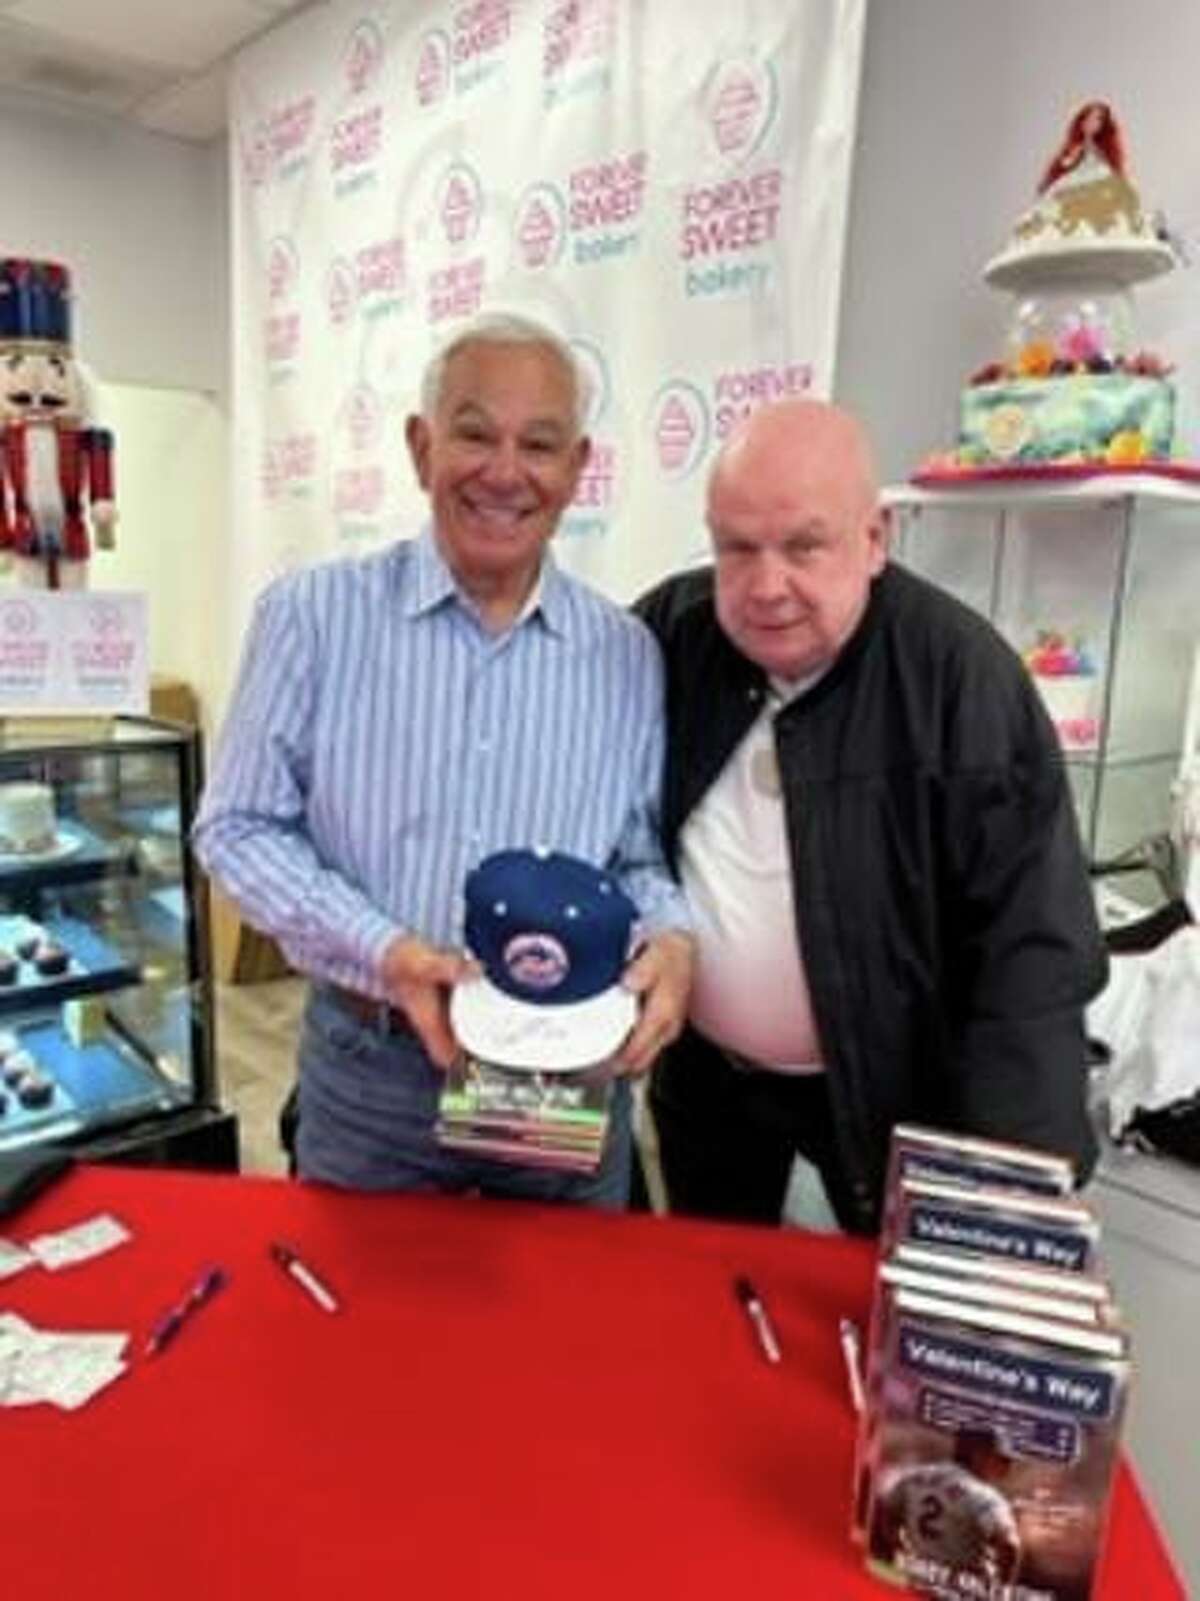 Former Major League Baseball manager Bobby Valentine, of Stamford, with Norwalk resident Art Kean of Kean's Korner Mobil in New Canaan at the Forever Sweet Bakery in Norwalk. Valentine signed copies of his book, "Valentine's Way," at the shop on Dec. 18.